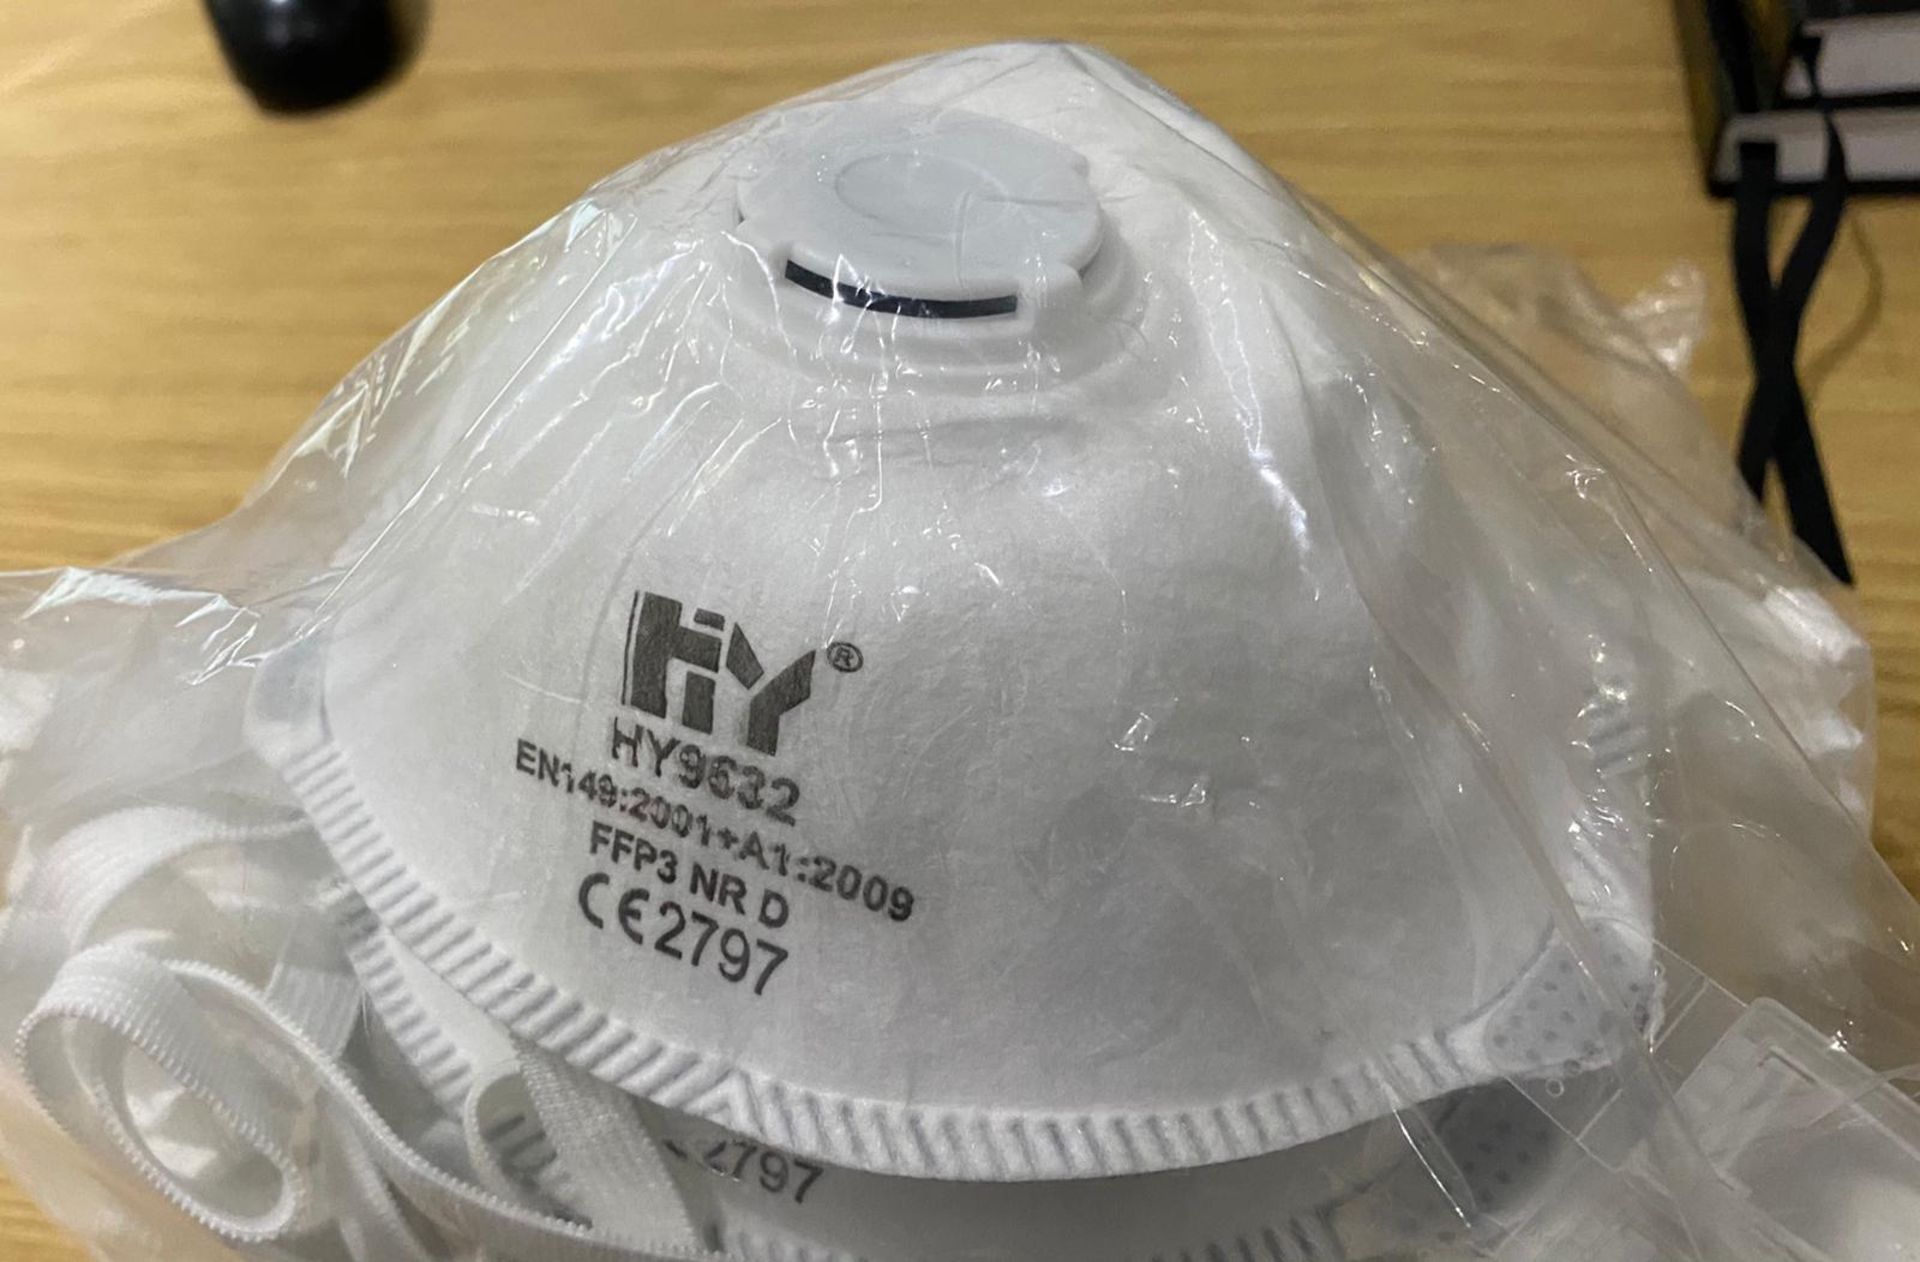 200 x Handanhy Fold Flat Disposable Face Masks With Exhalation Valves - Type HY8232 FFP3 - PPE - Image 2 of 5